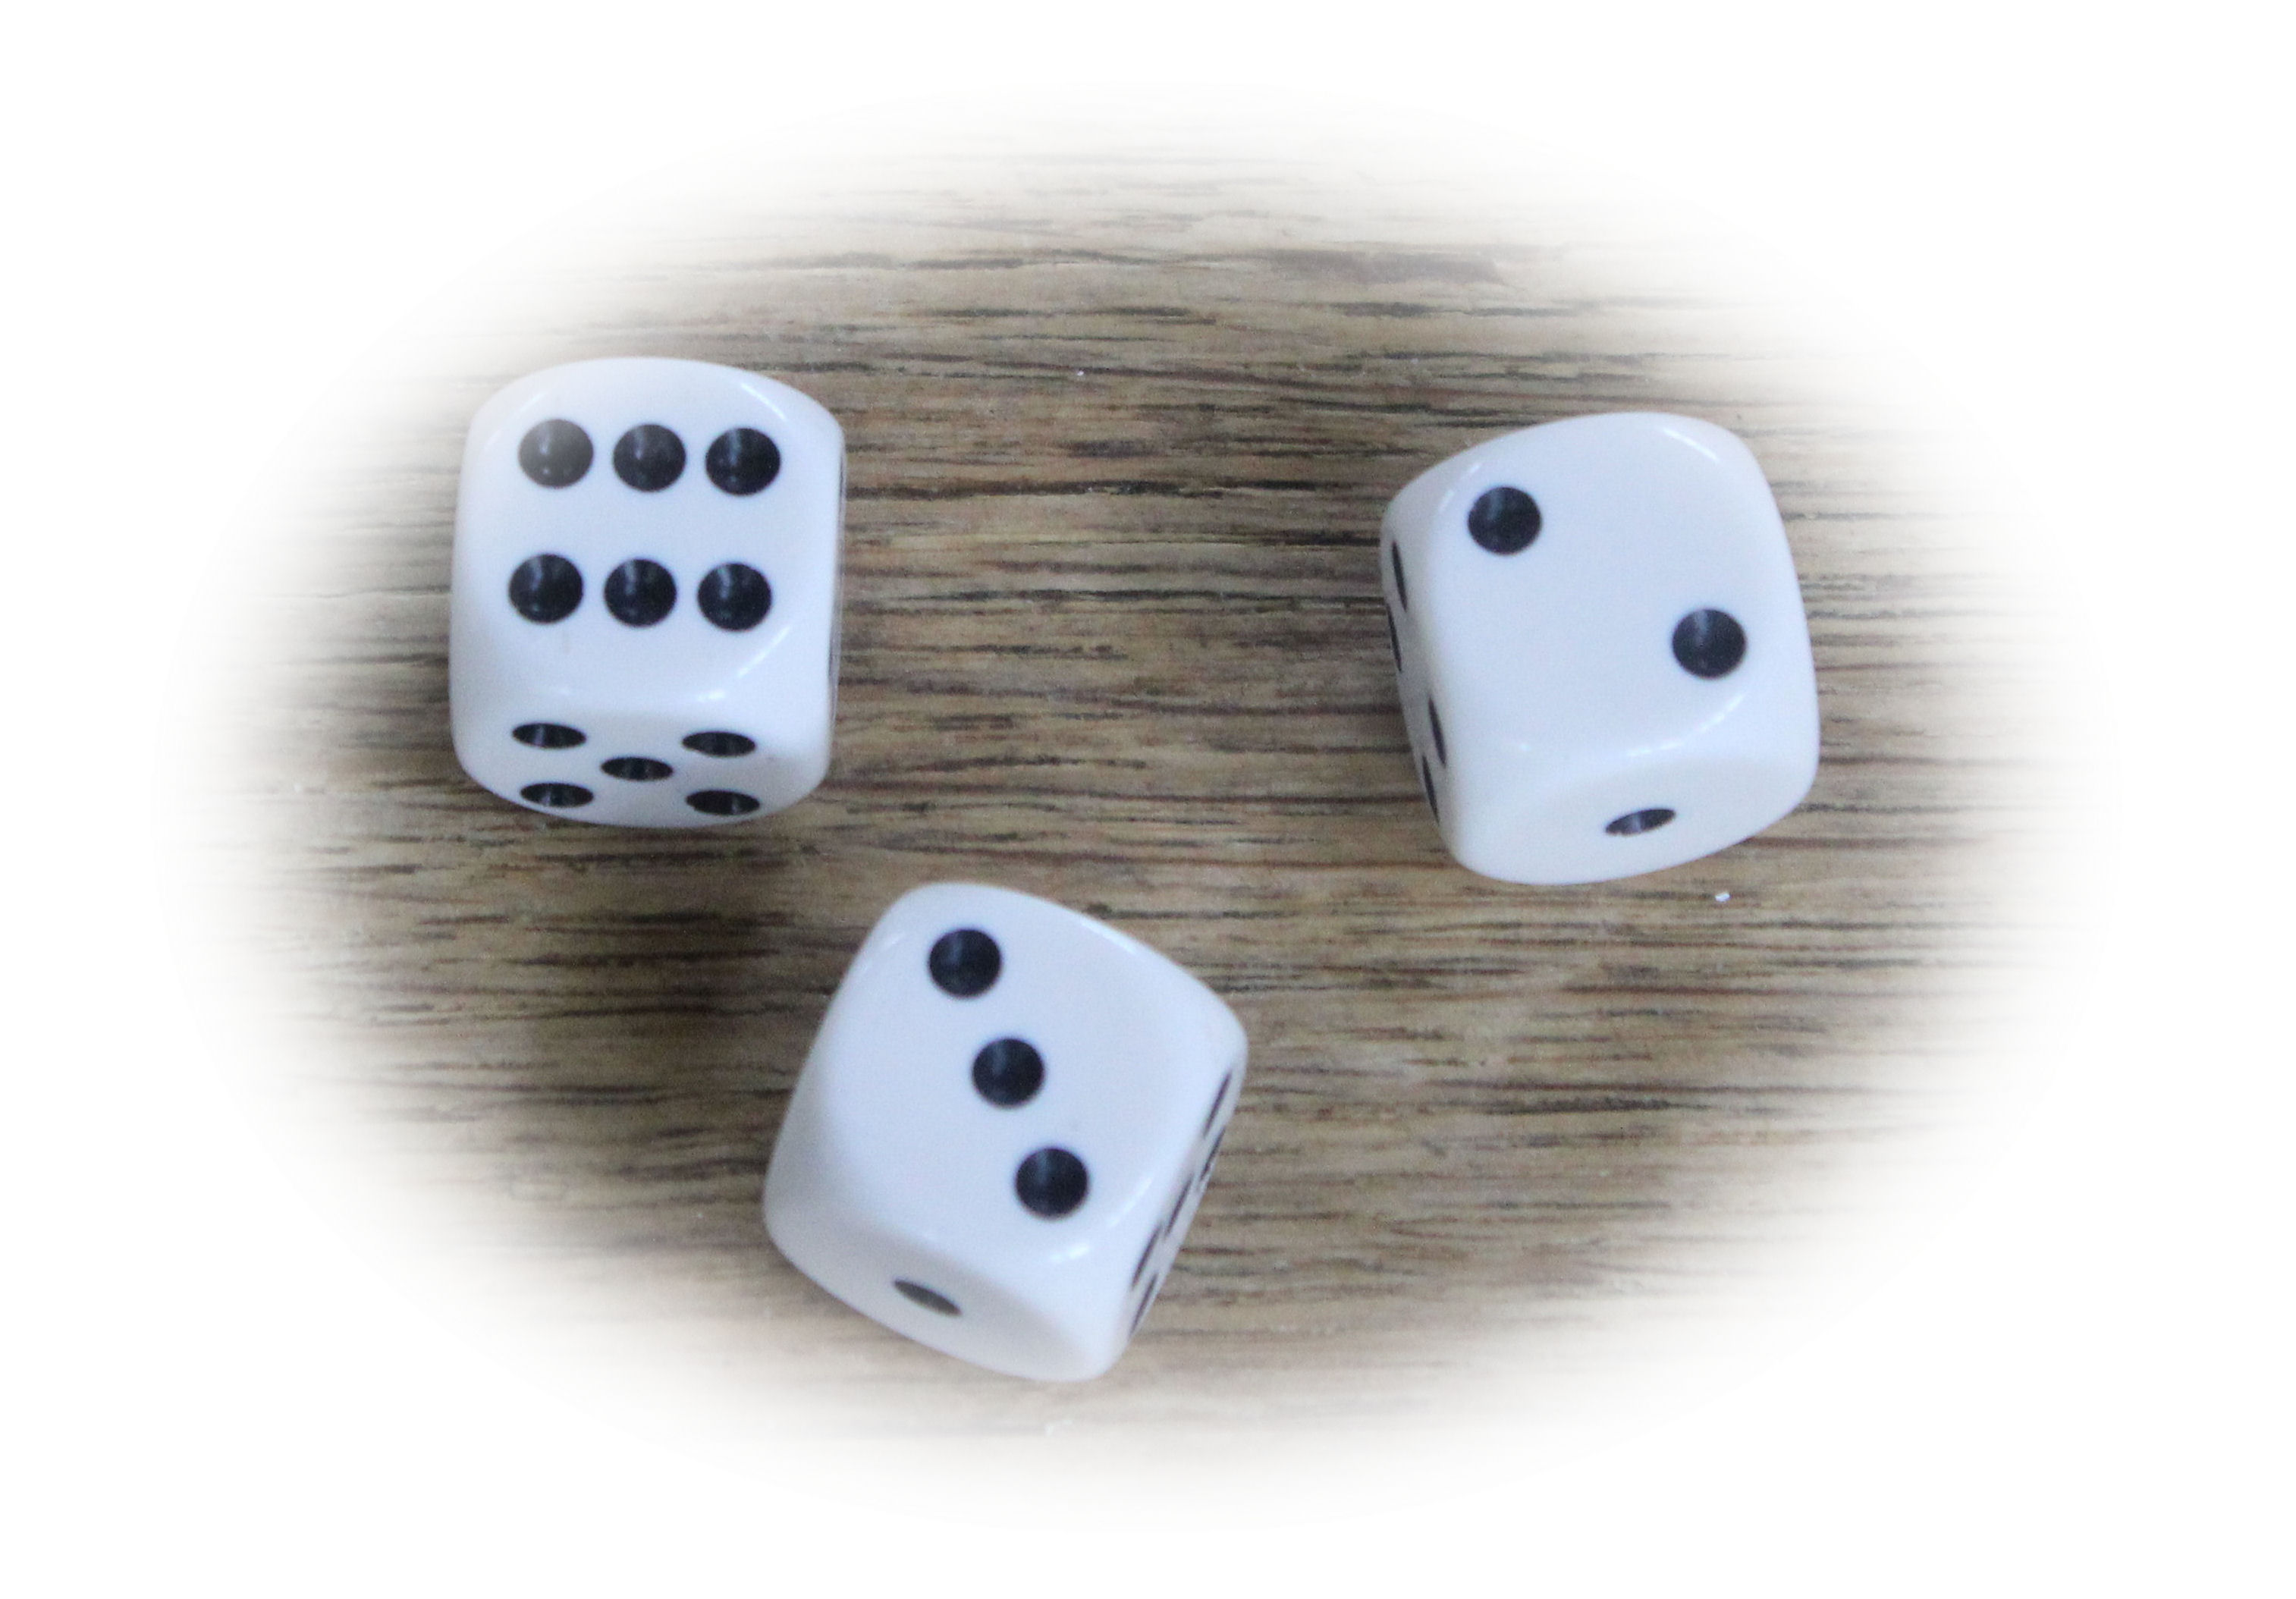 Printable dice game instructions